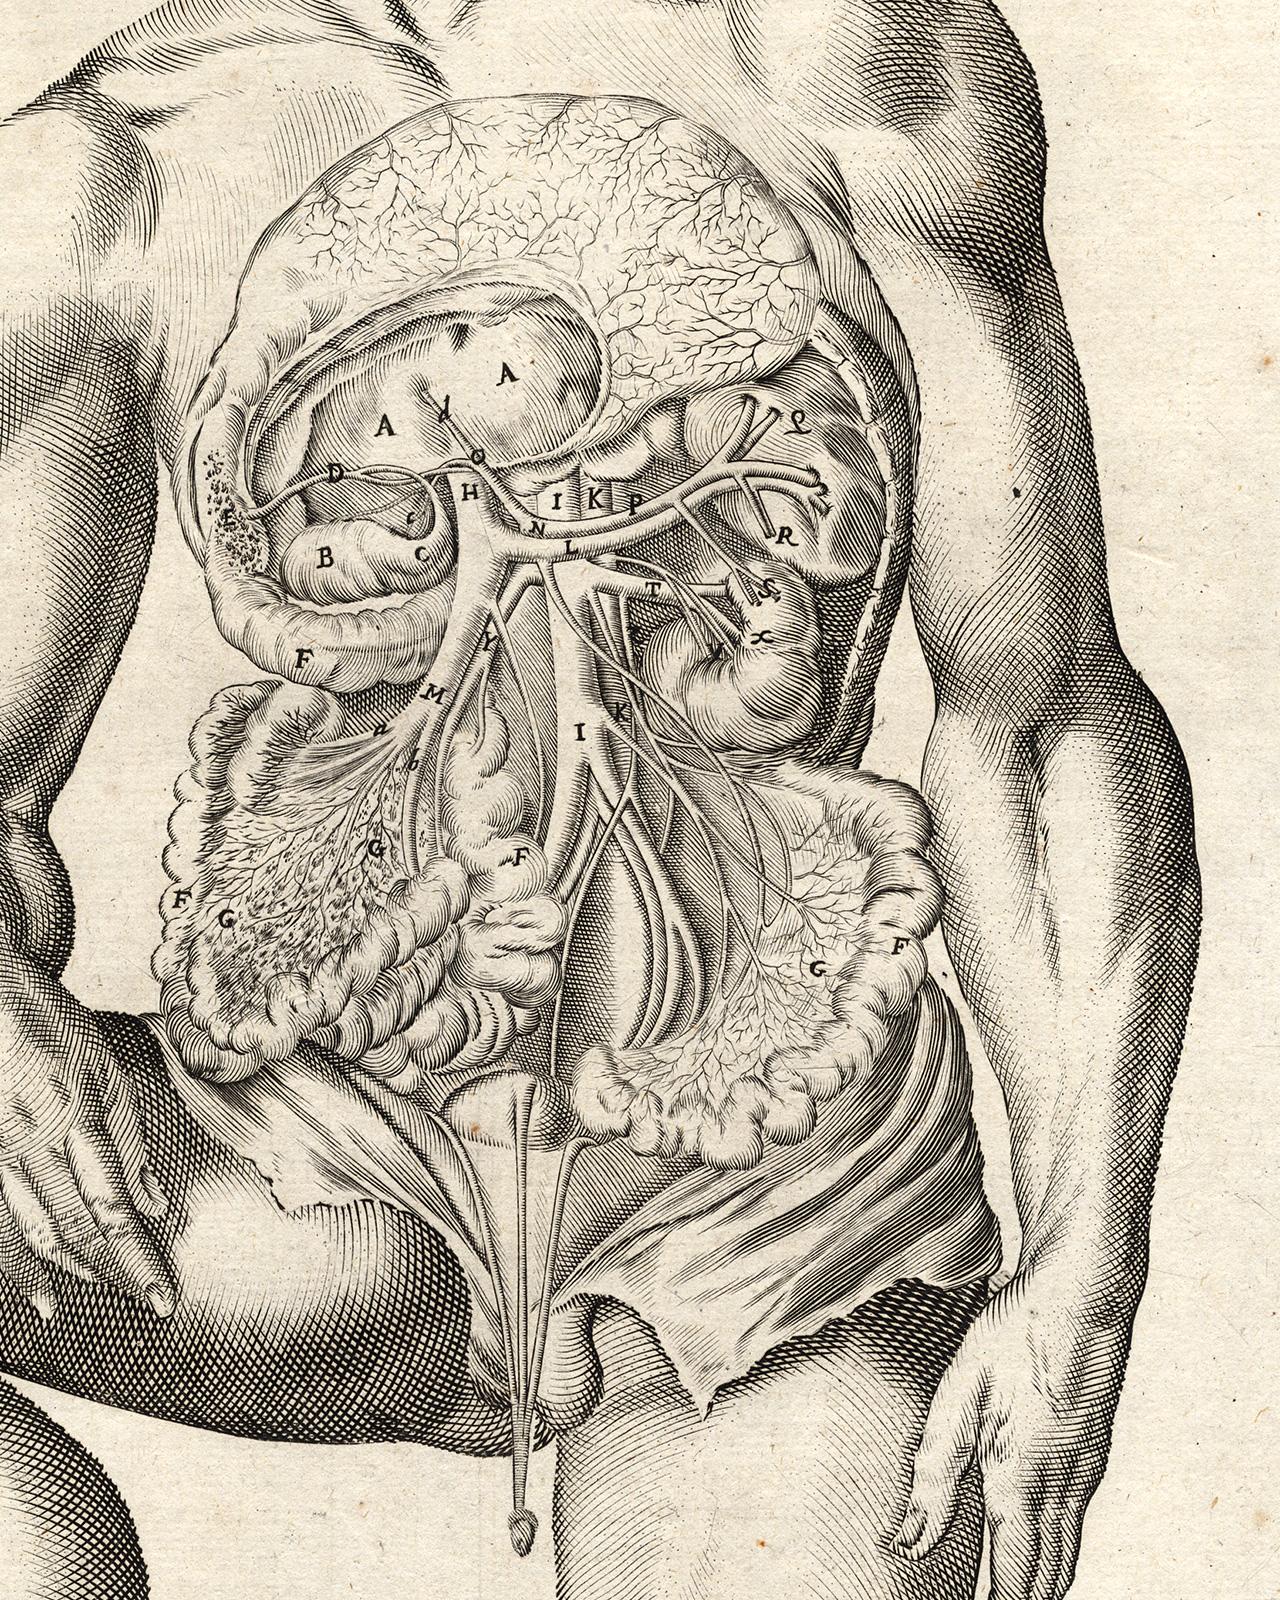 Subject: Very rare anatomical print. Plate, Lib. VI, Tab. I. Plate, showing a standing naked man, with exposed intestines, liver and gall bladder. The man is depicted within a decorated landscape background. As the key to this plate(s) is on the